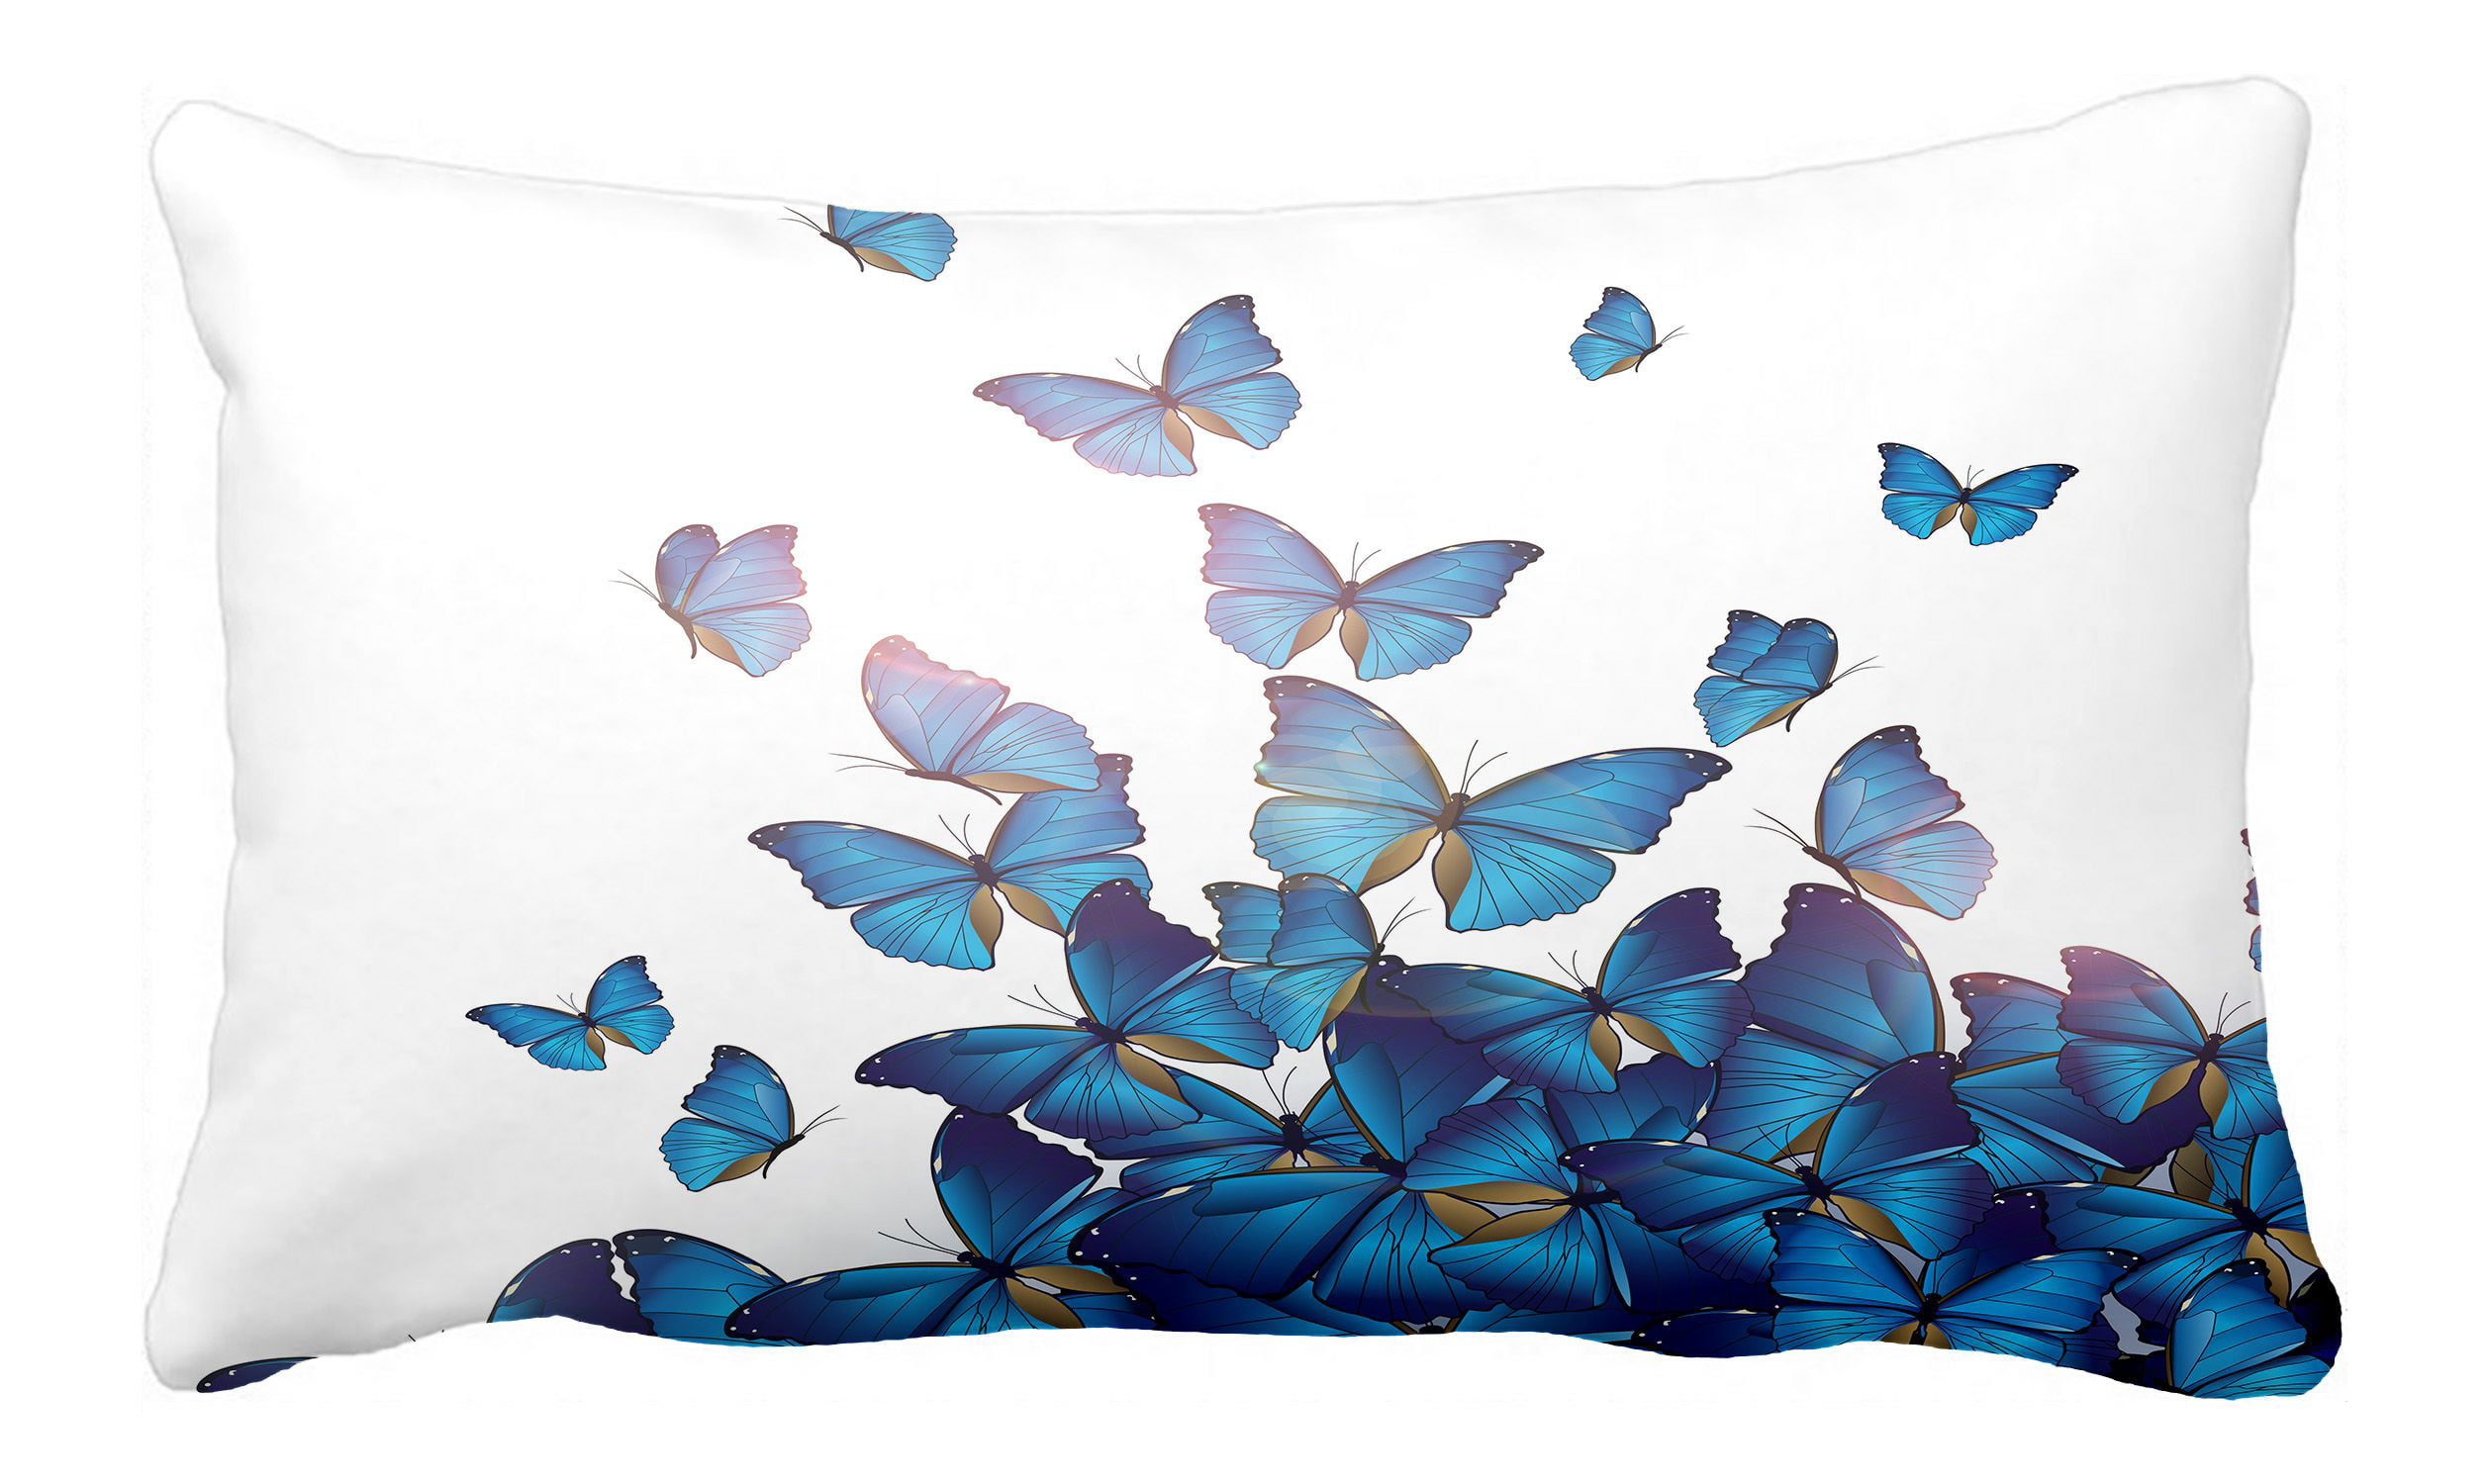 decorbox Blue Paris Butterfly Love Flower Pattern 18x18 Inch Cotton Polyester Square Throw Pillow Case Decorative Durable Cushion Slipcover Home Decor Standard Size Accent Pillowcase Slip Cover 